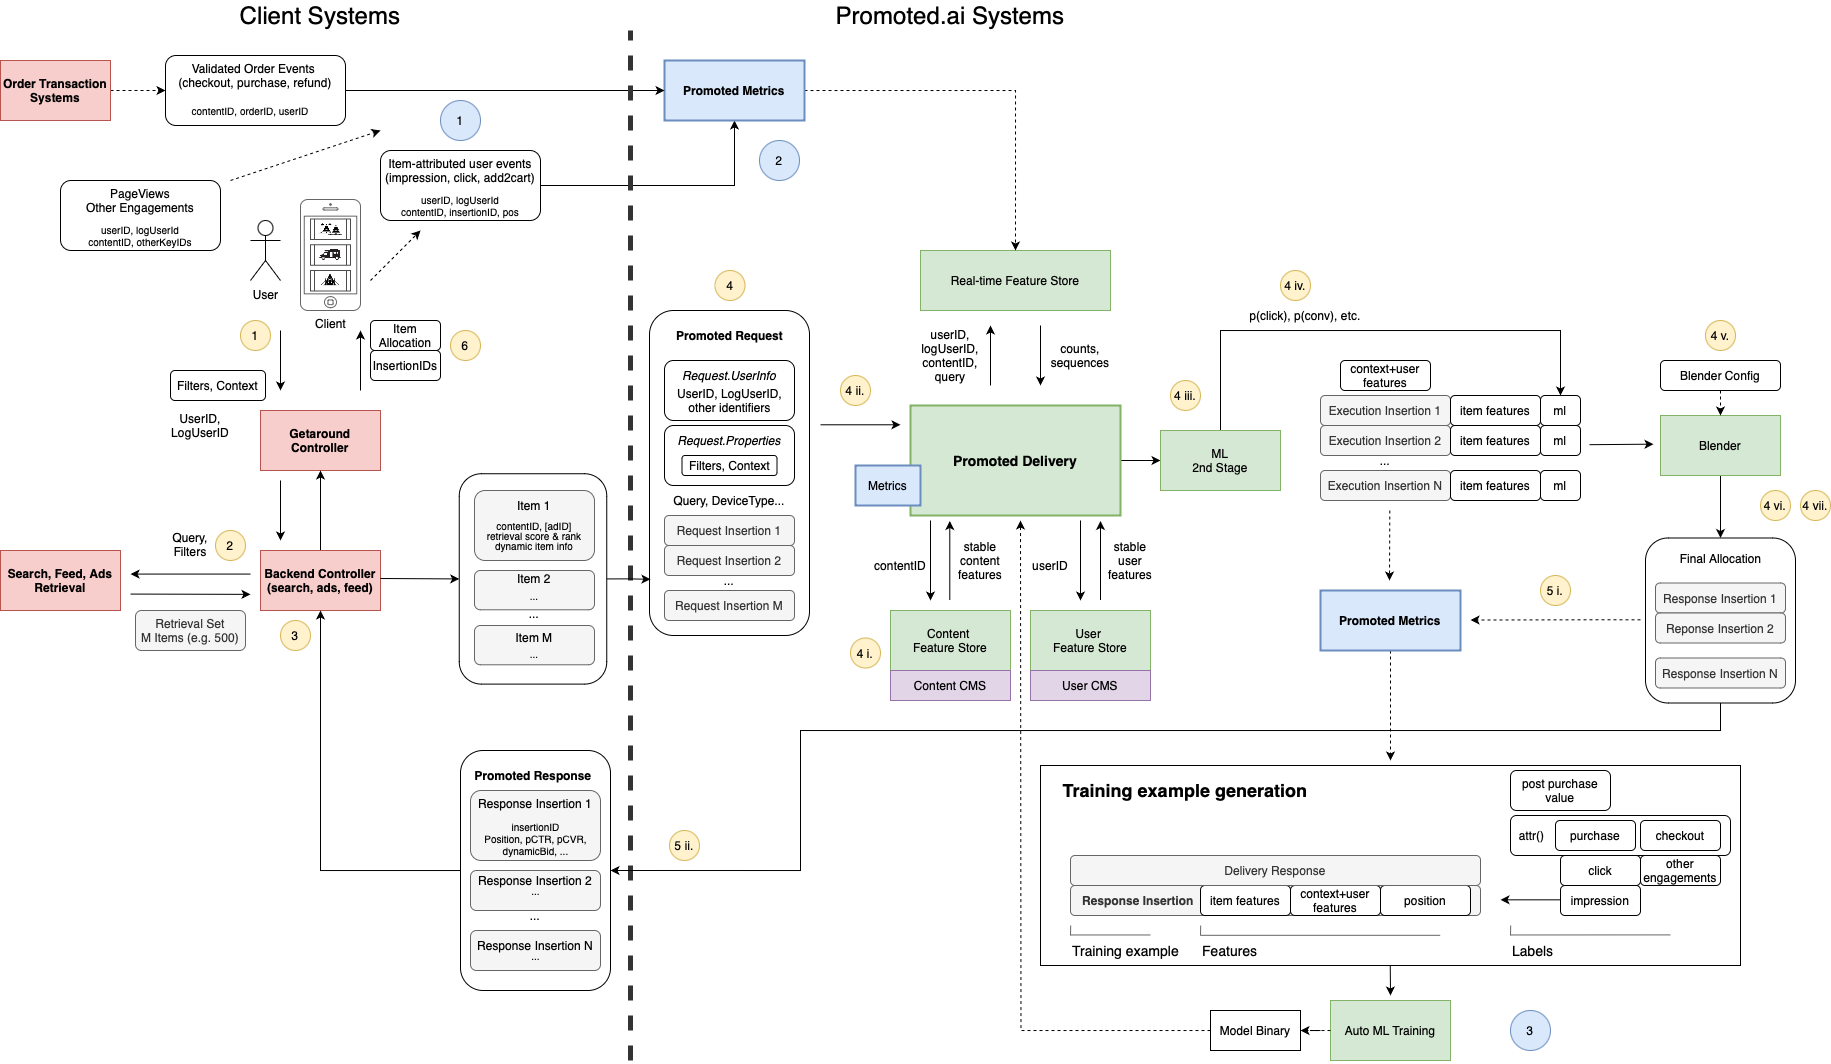 Abbreviated Delivery API showing the process of a query and Promoted's request and response. See [Delivery System Diagrams](doc:delivery-system-diagrams) for more detail.